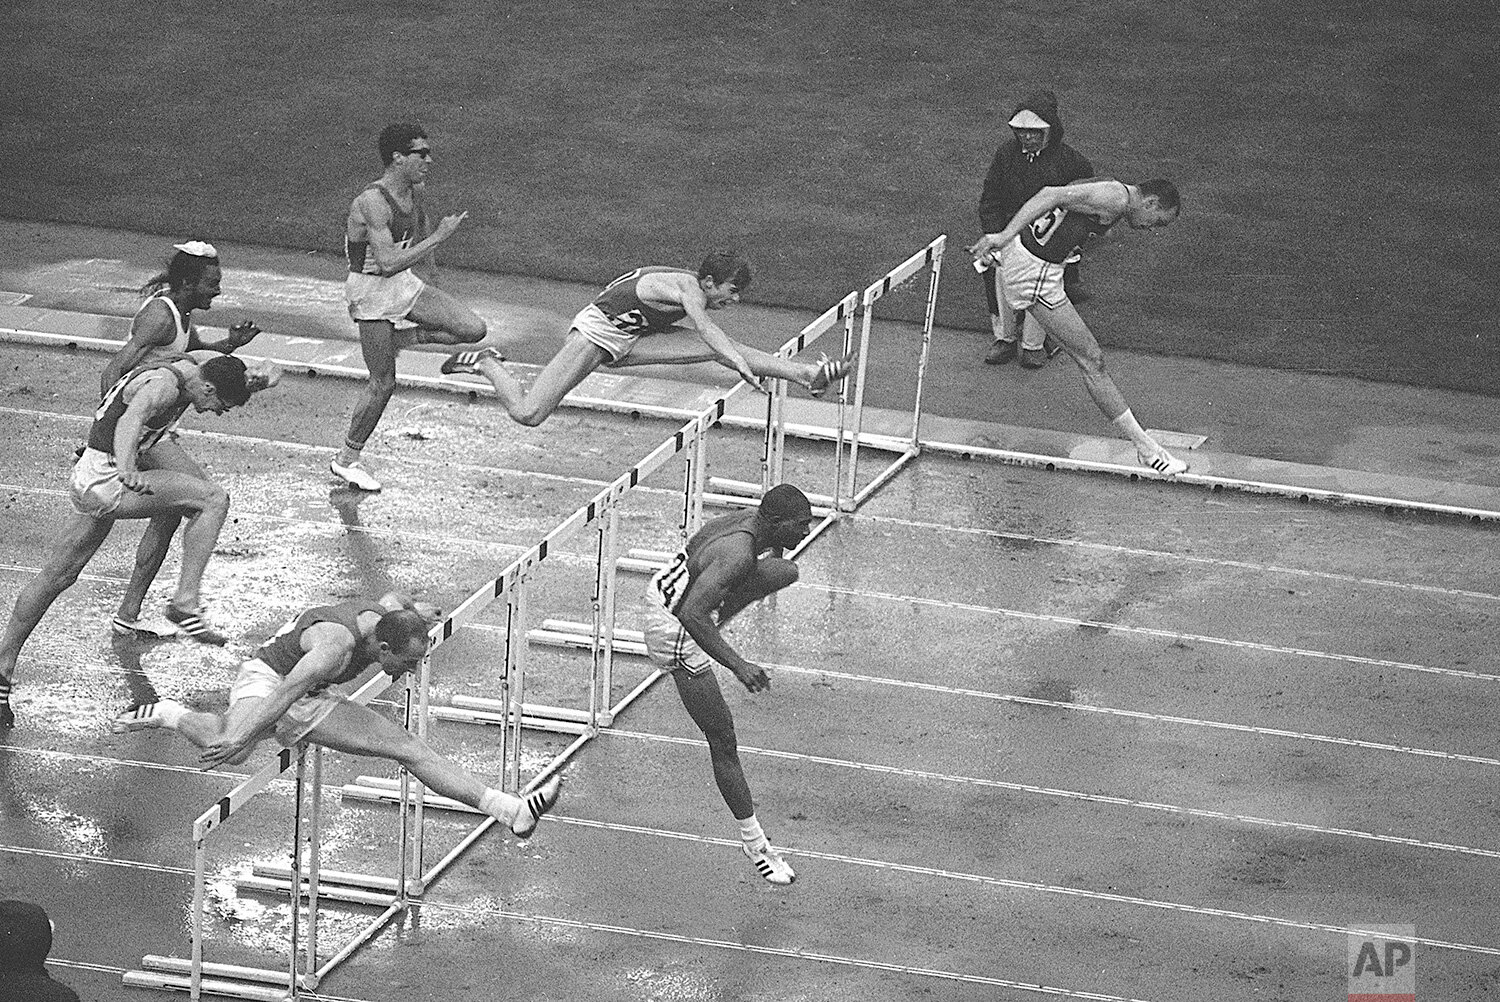  Hayes Jones of Detroit, bottom right, and Blaine Lindgren of Salt Lake City, clear the last hurdle in the 110-meter hurdle final which Jones won, at the Olympic Games in Tokyo, Oct. 18, 1964. At bottom left is Anatoly Mikhailov of the USSR (3rd).  A